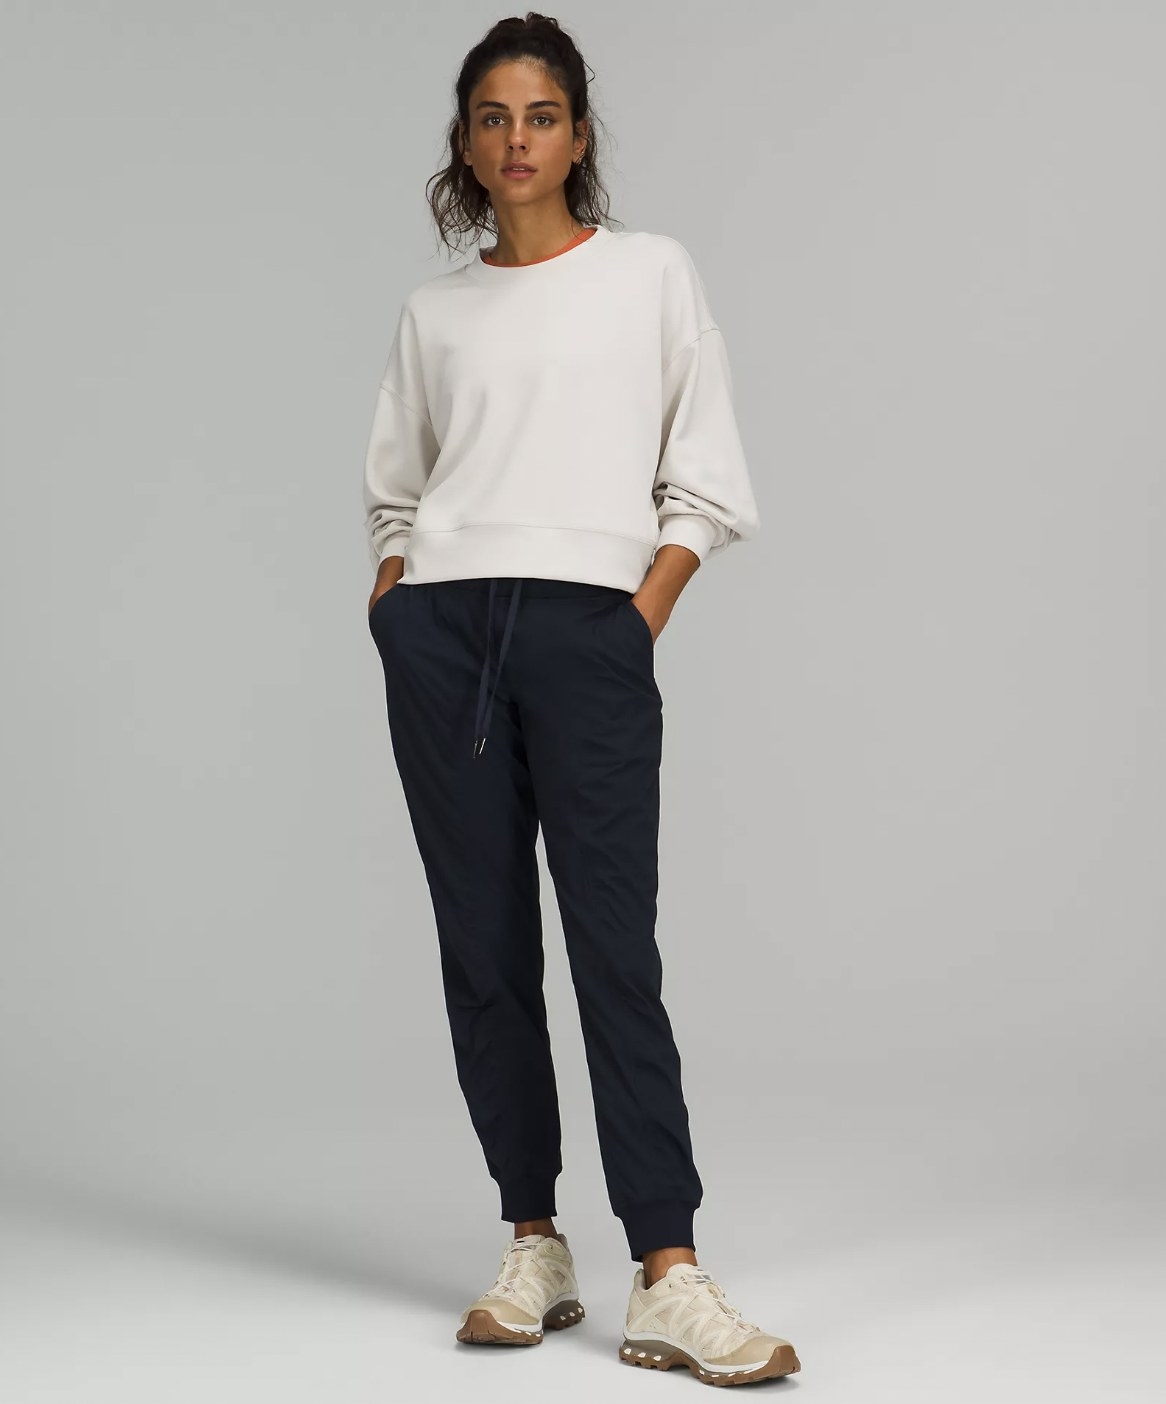 Model wearing the navy blue joggers with white crewneck sweatshirt